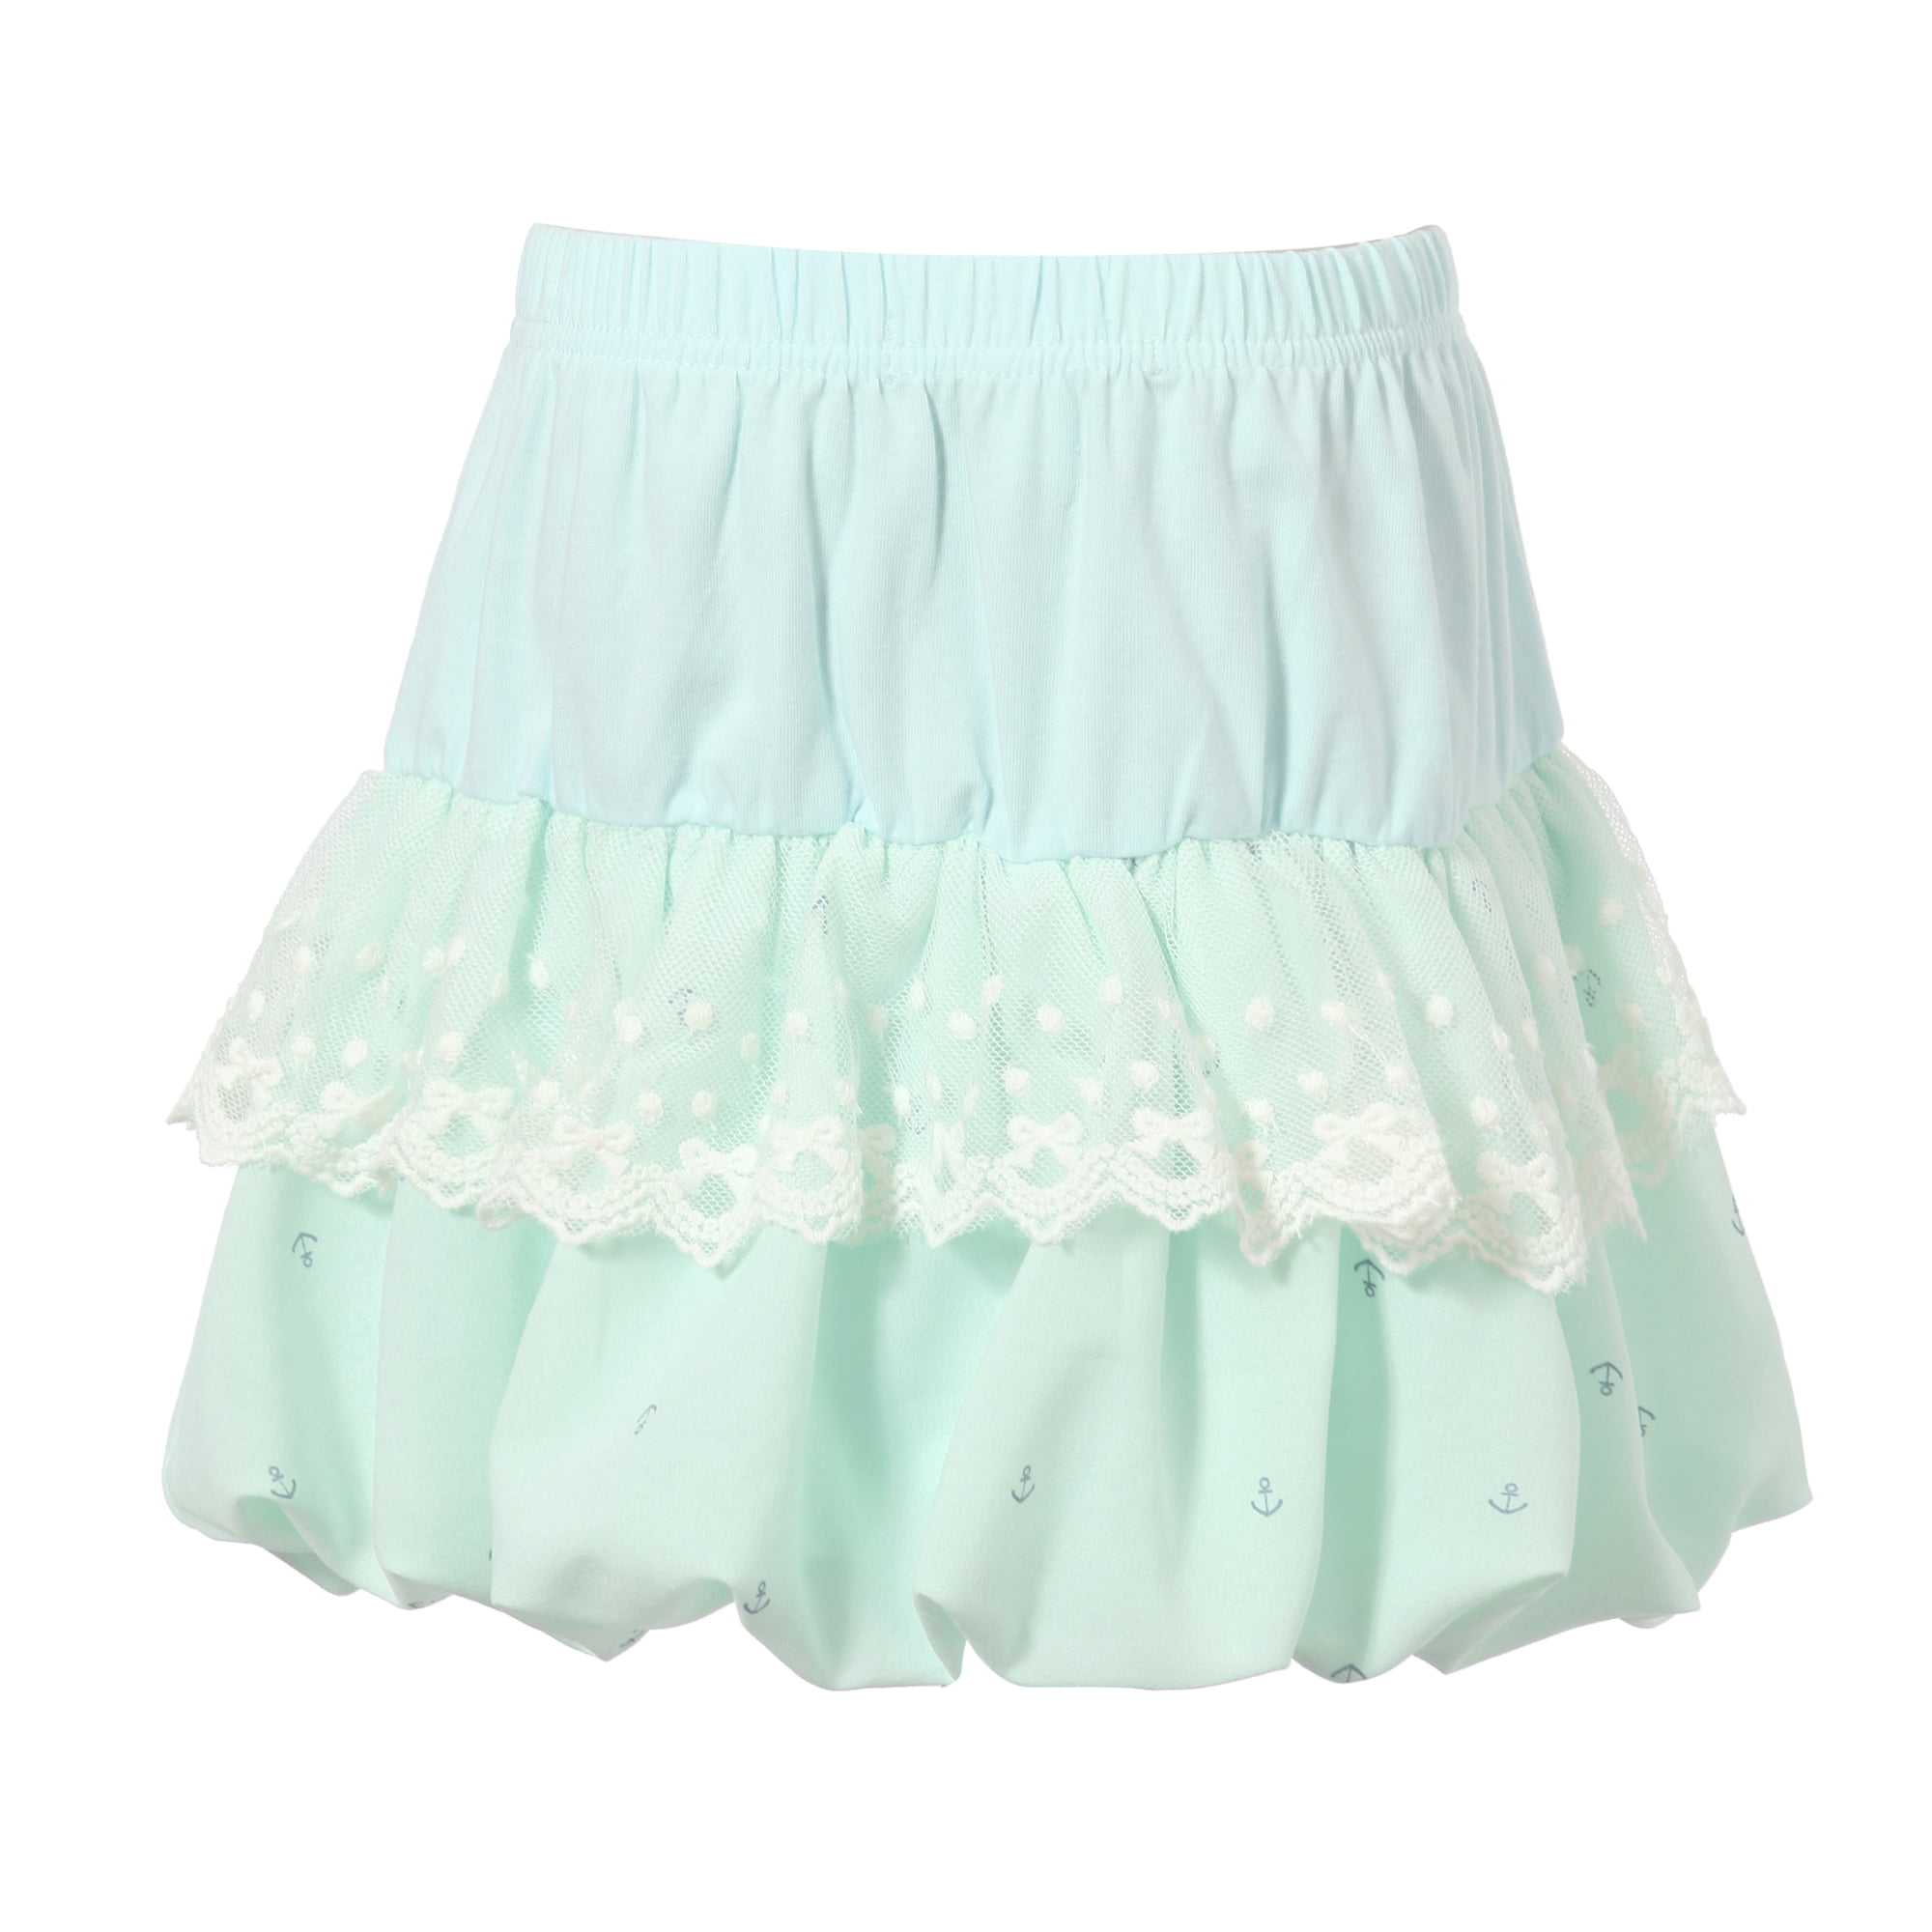 Richie House Girls' Multilayered Skirt with Lace RH0251